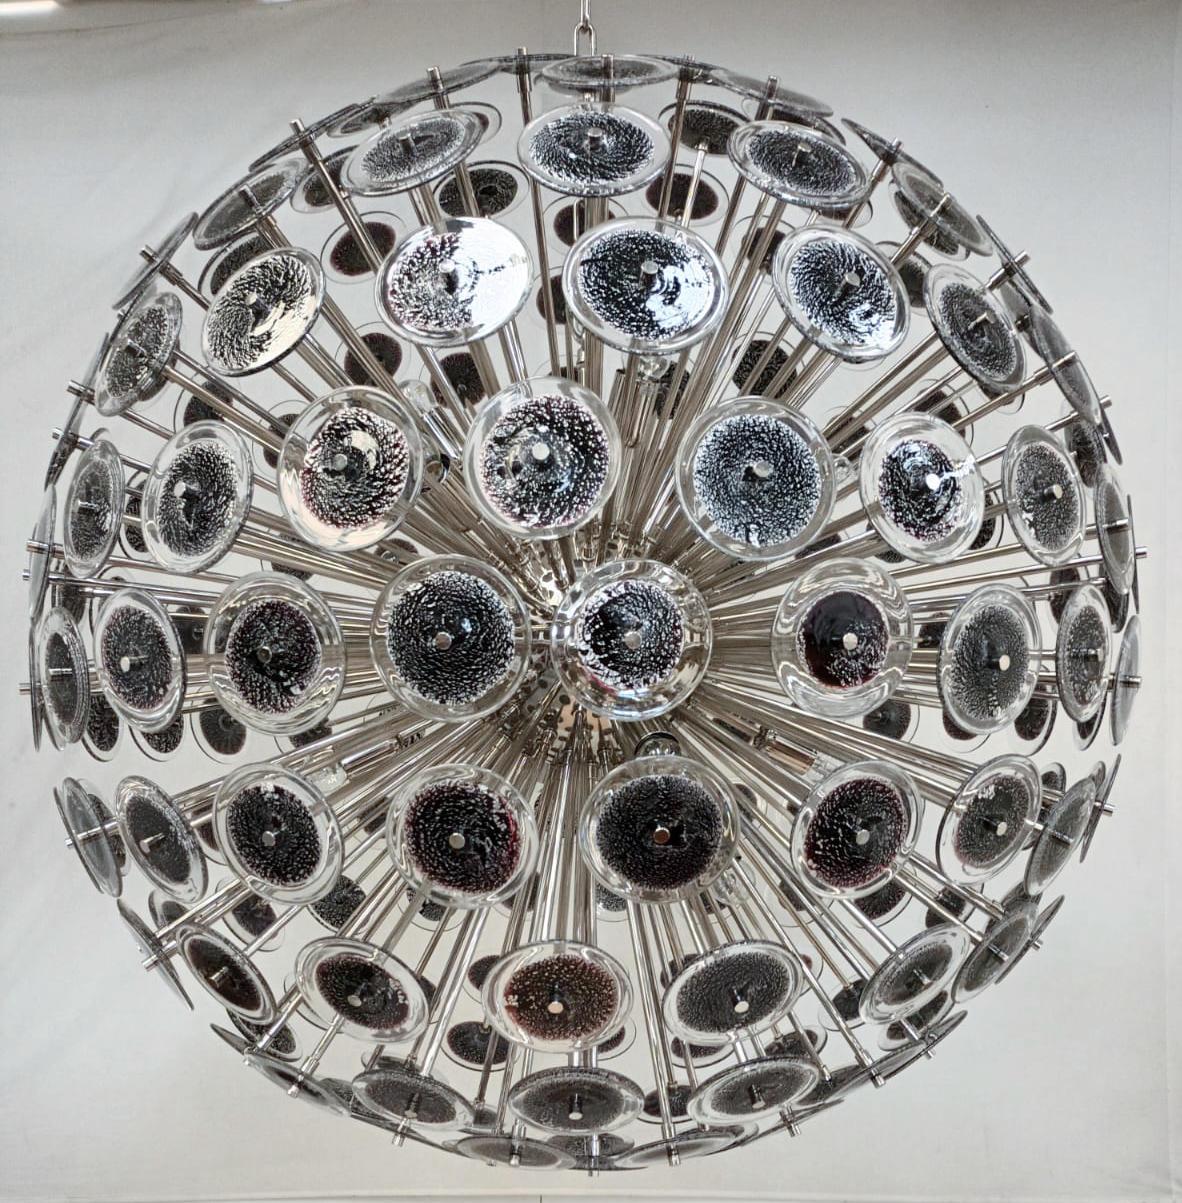 Italian round sputnik chandelier with black Murano glass discs infused with silver flecks, mounted on chrome plated metal frame by Fabio Ltd / Made in Italy
Measures: Diameter 43.5 inches, height 43.5 inches plus chain and canopy
16 lights / E26